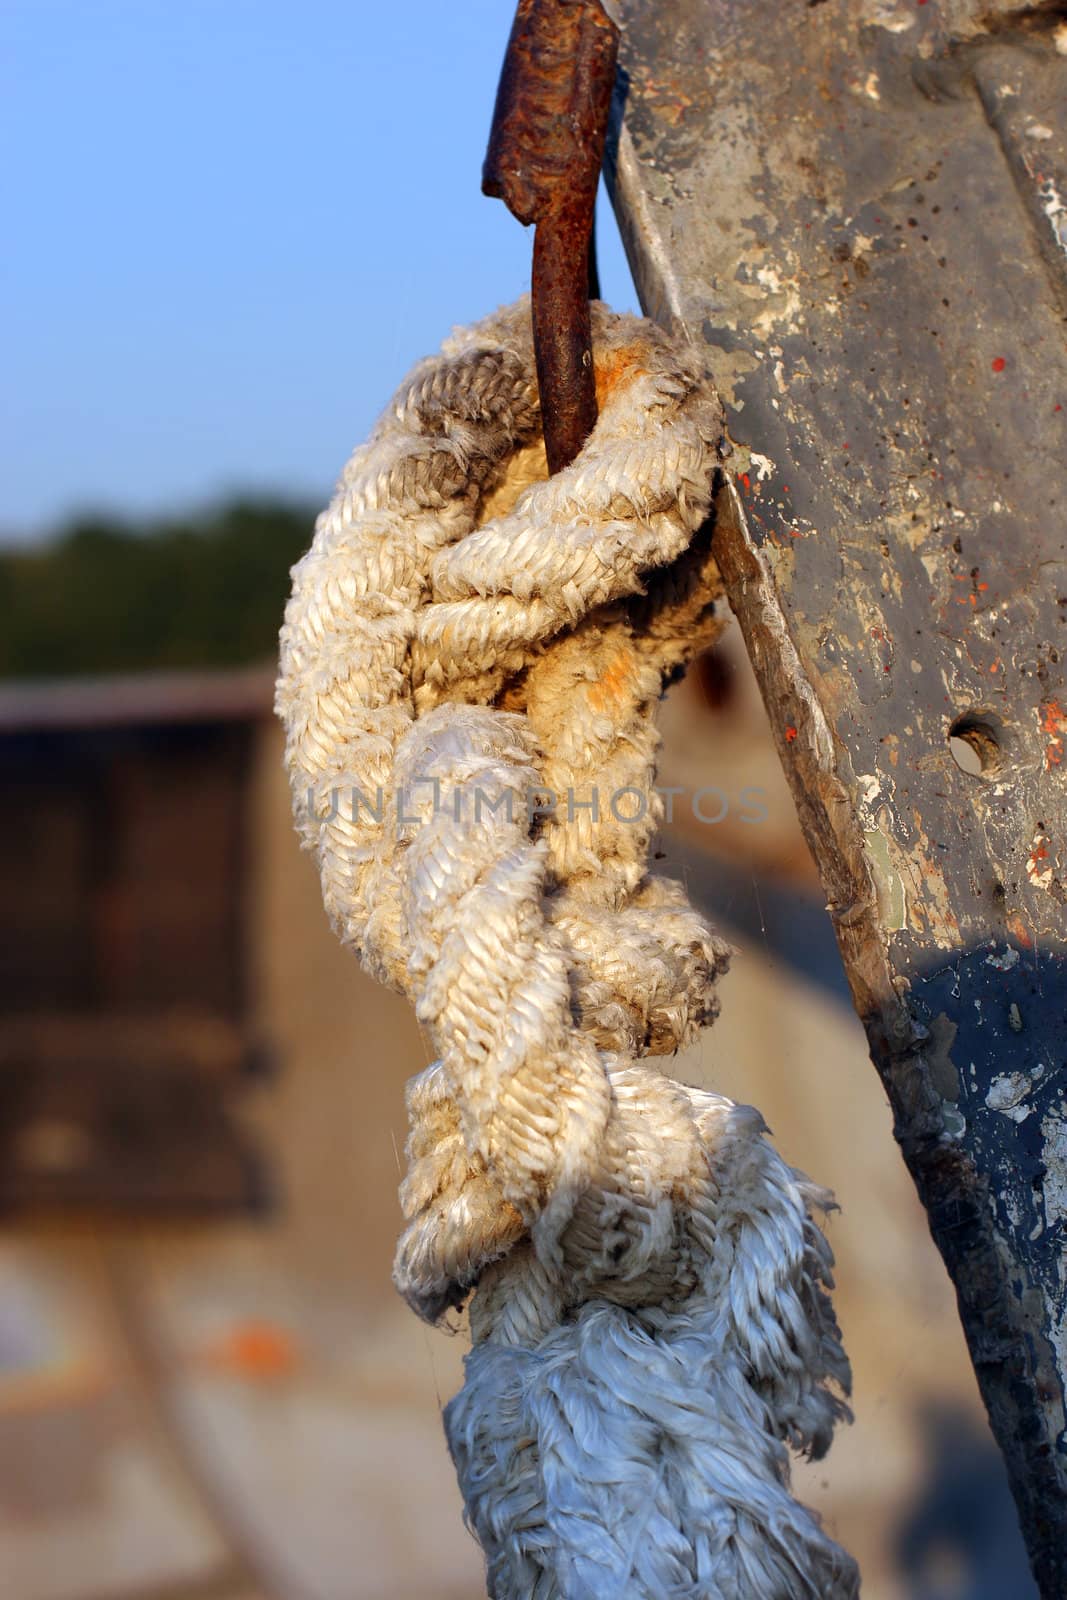 bend of old rope of the bow of the old boat (marine knot). Close up